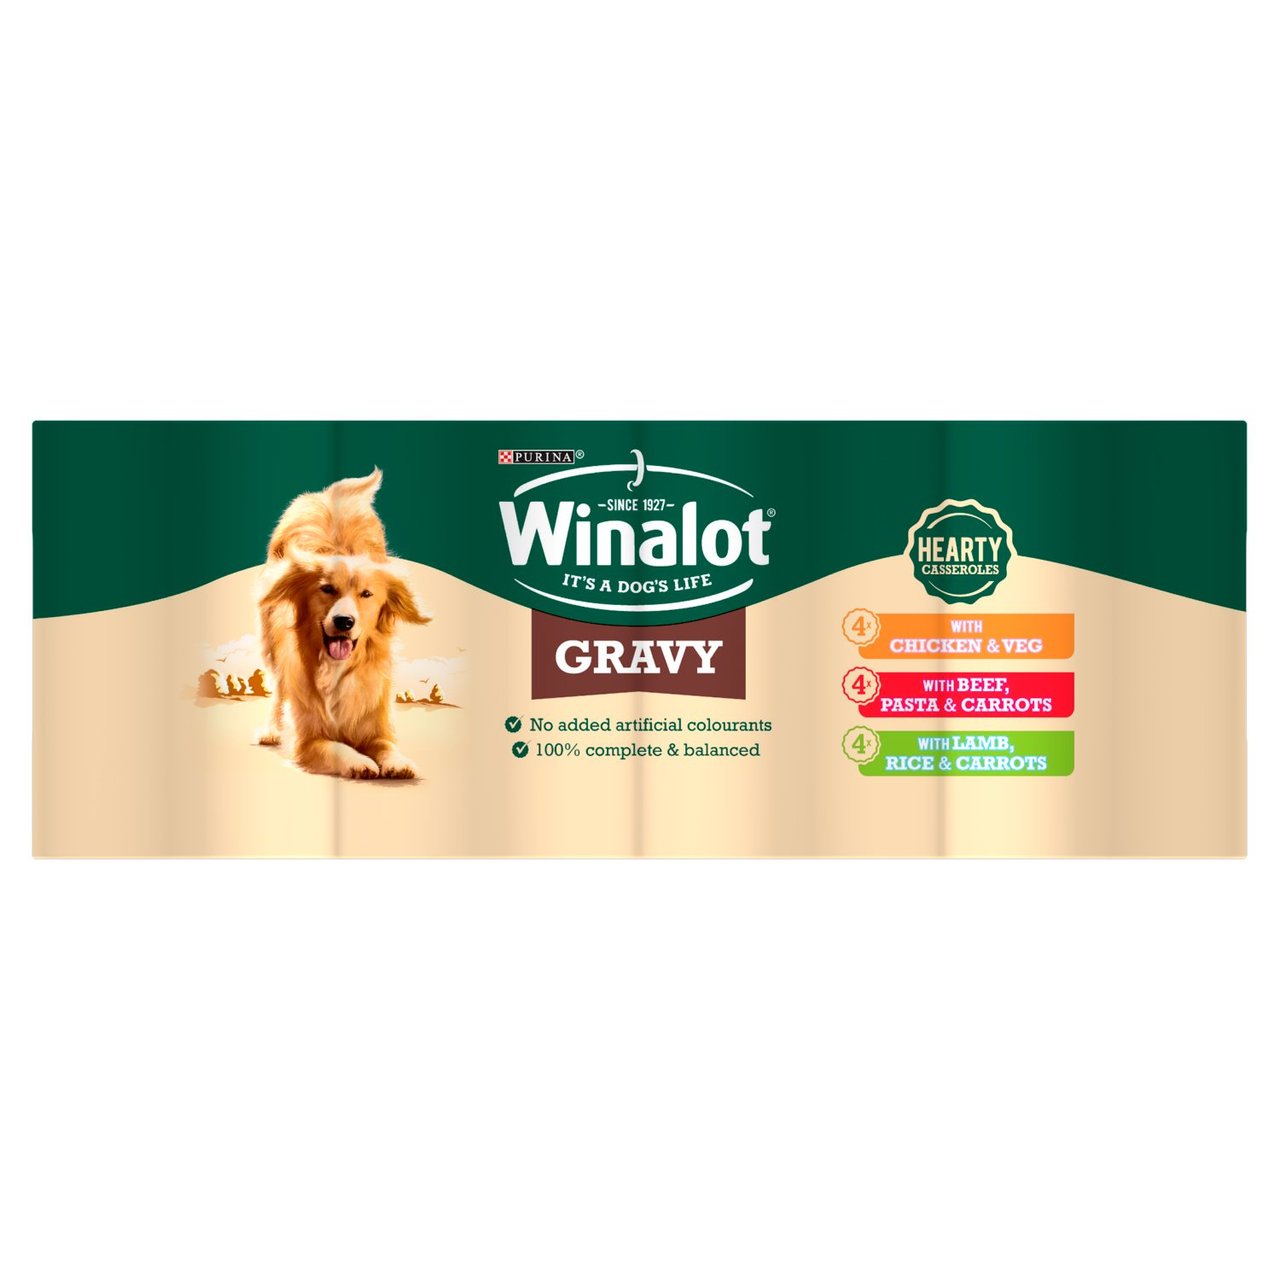 An image of Winalot Hearty Meat Dog Food in Gravy